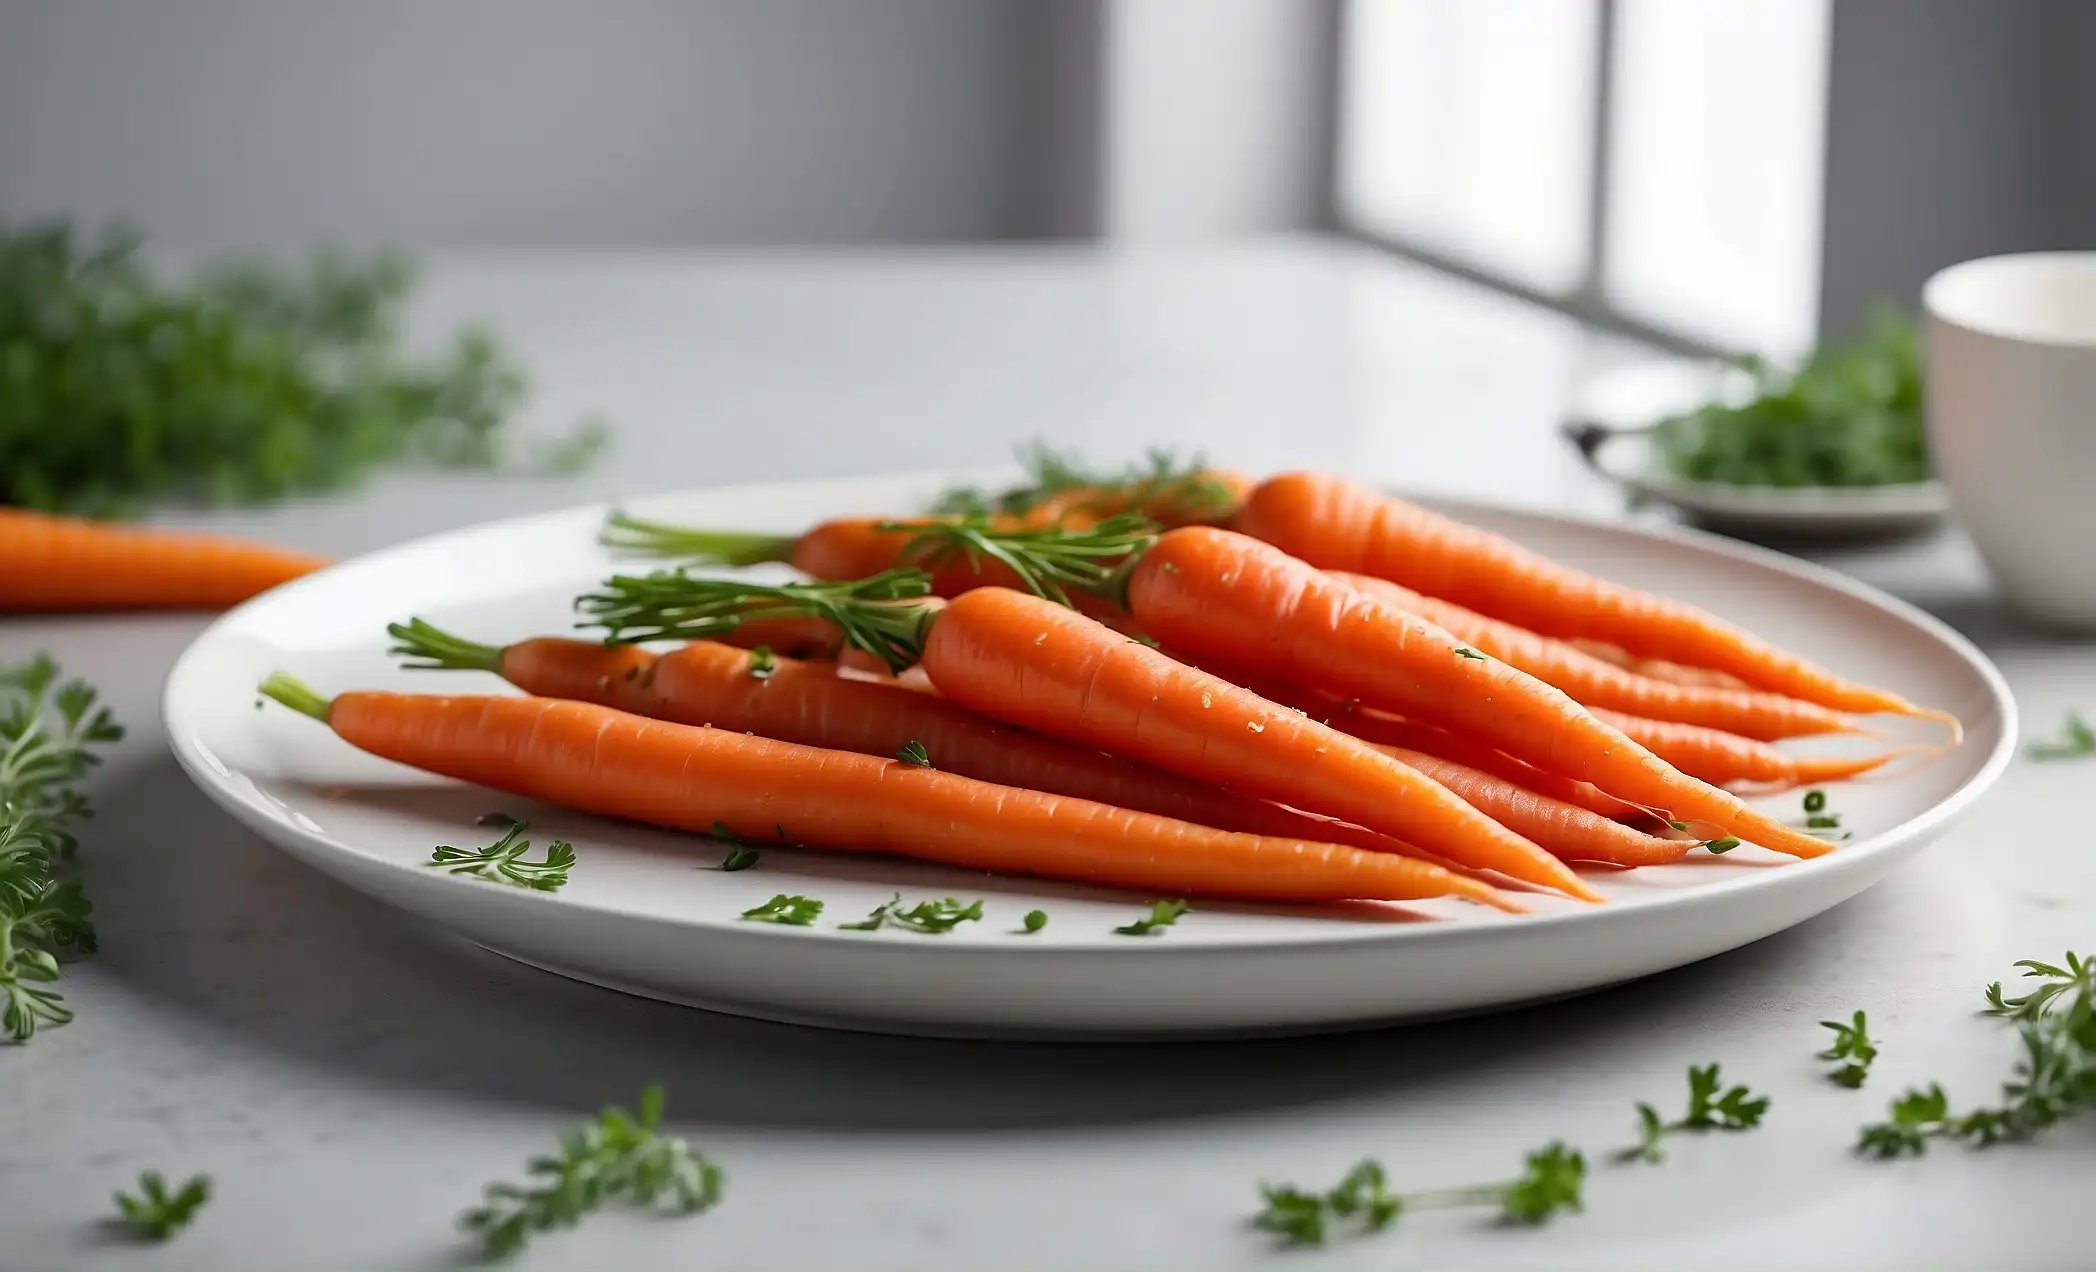 How to Caramelize Carrots Without Sugar: Natural Sweetness